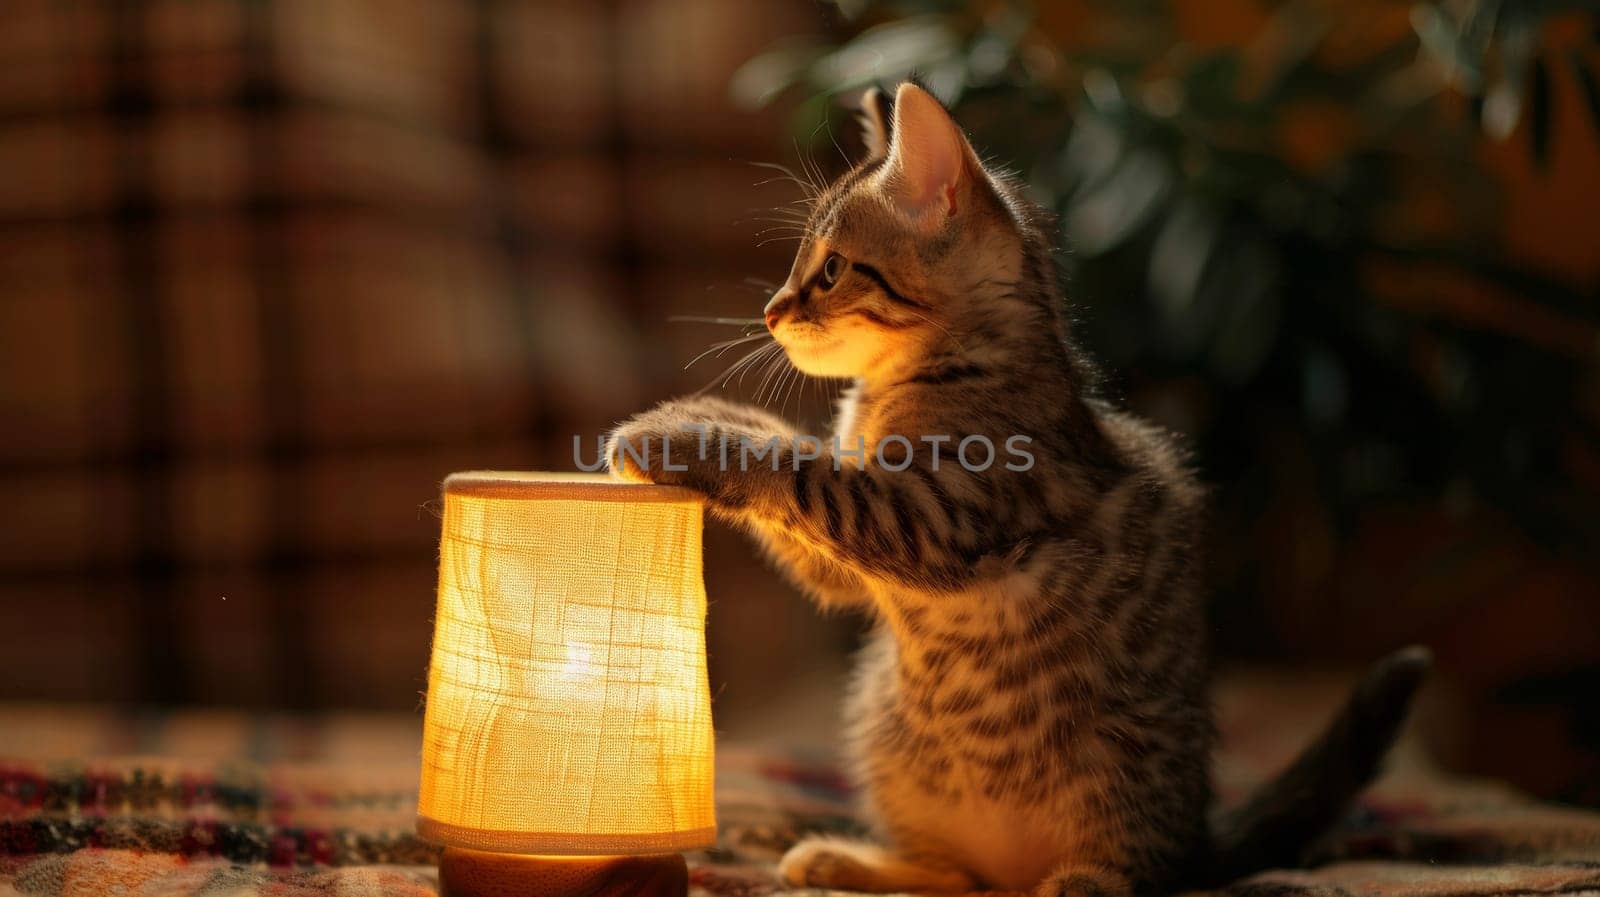 A kitten sitting on a bed with its paw up next to the lamp, AI by starush